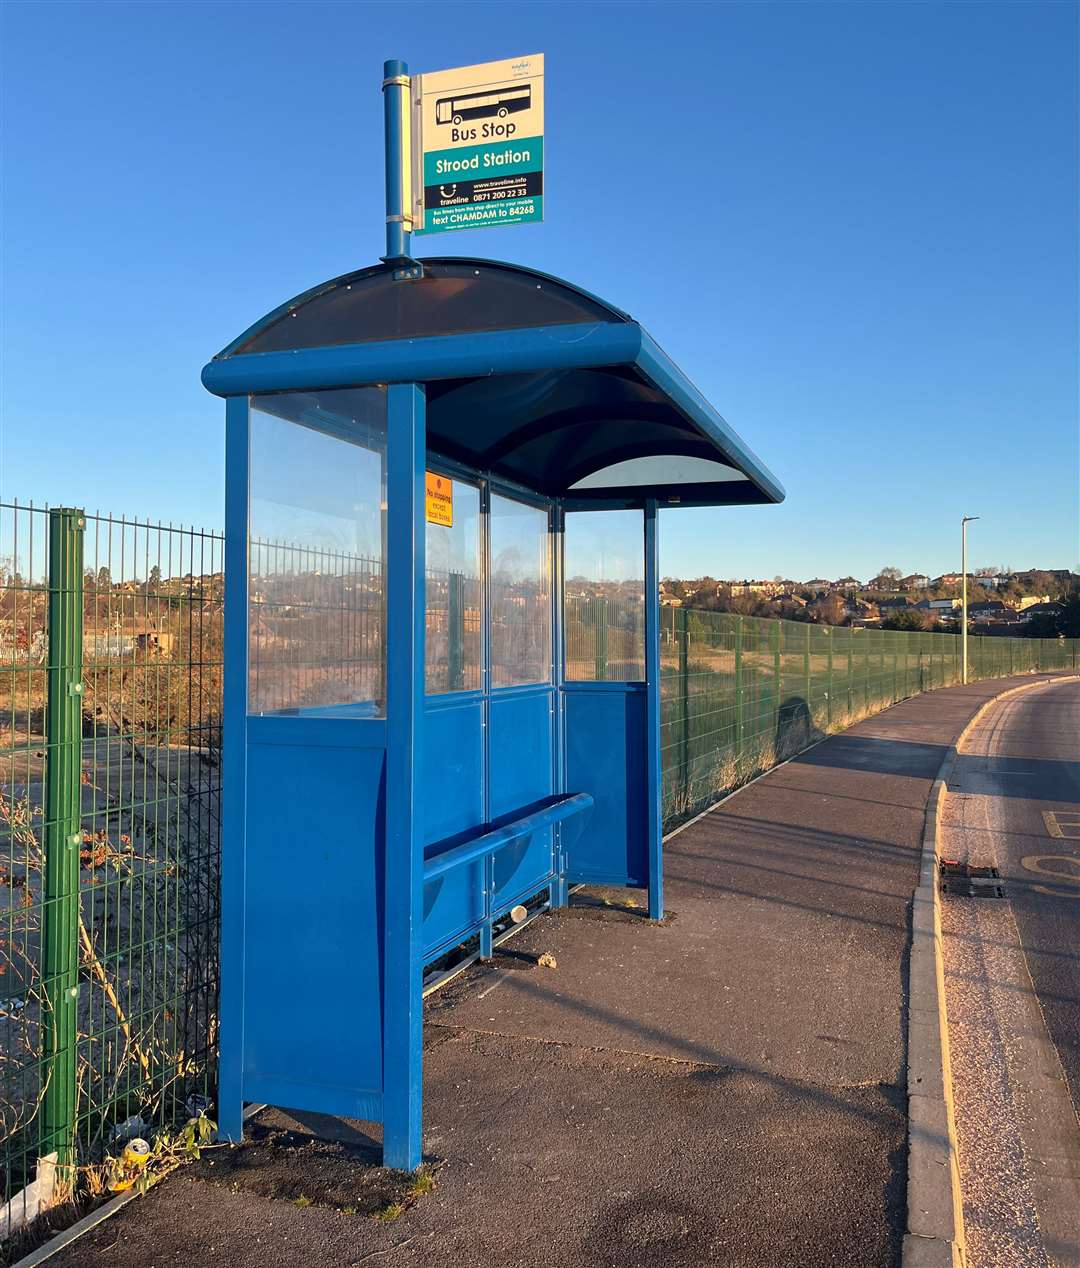 The bus stop by Strood station